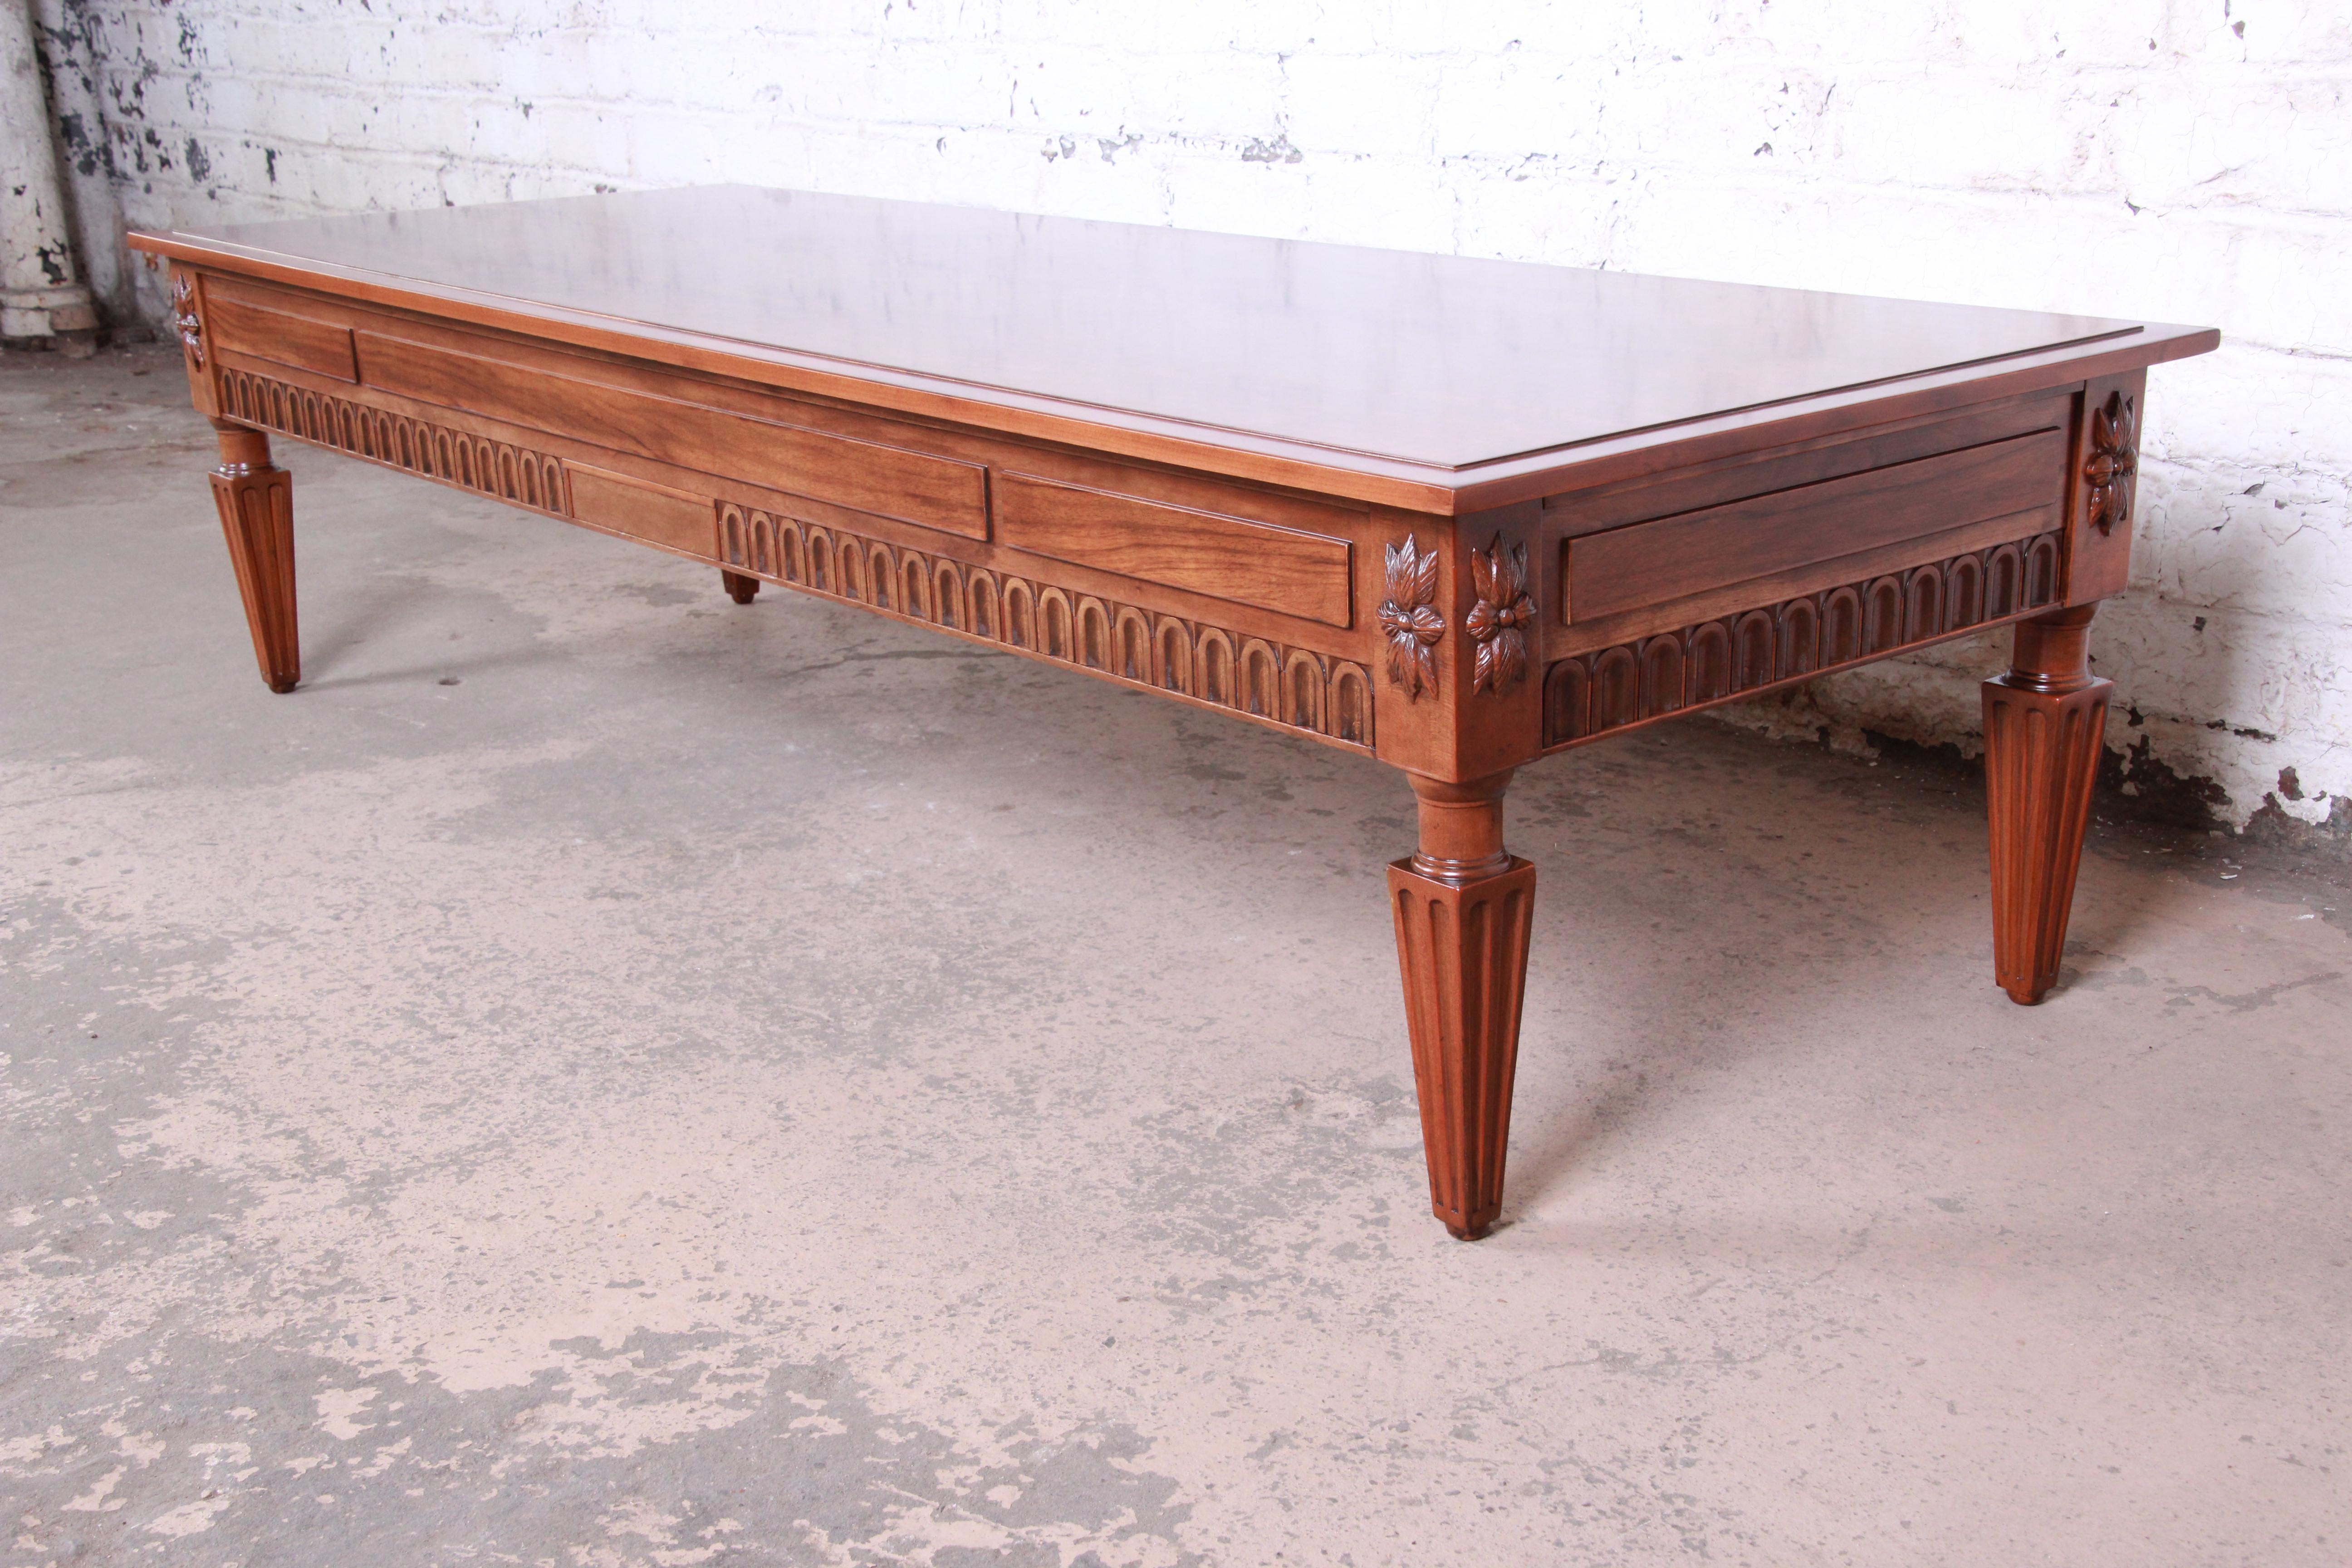 An exceptional French Regency Louis XVI style coffee table by Baker Furniture. The table features stunning burled walnut wood grain and beautiful carved wood details. Made with the highest quality craftsmanship as expected from Baker. The original